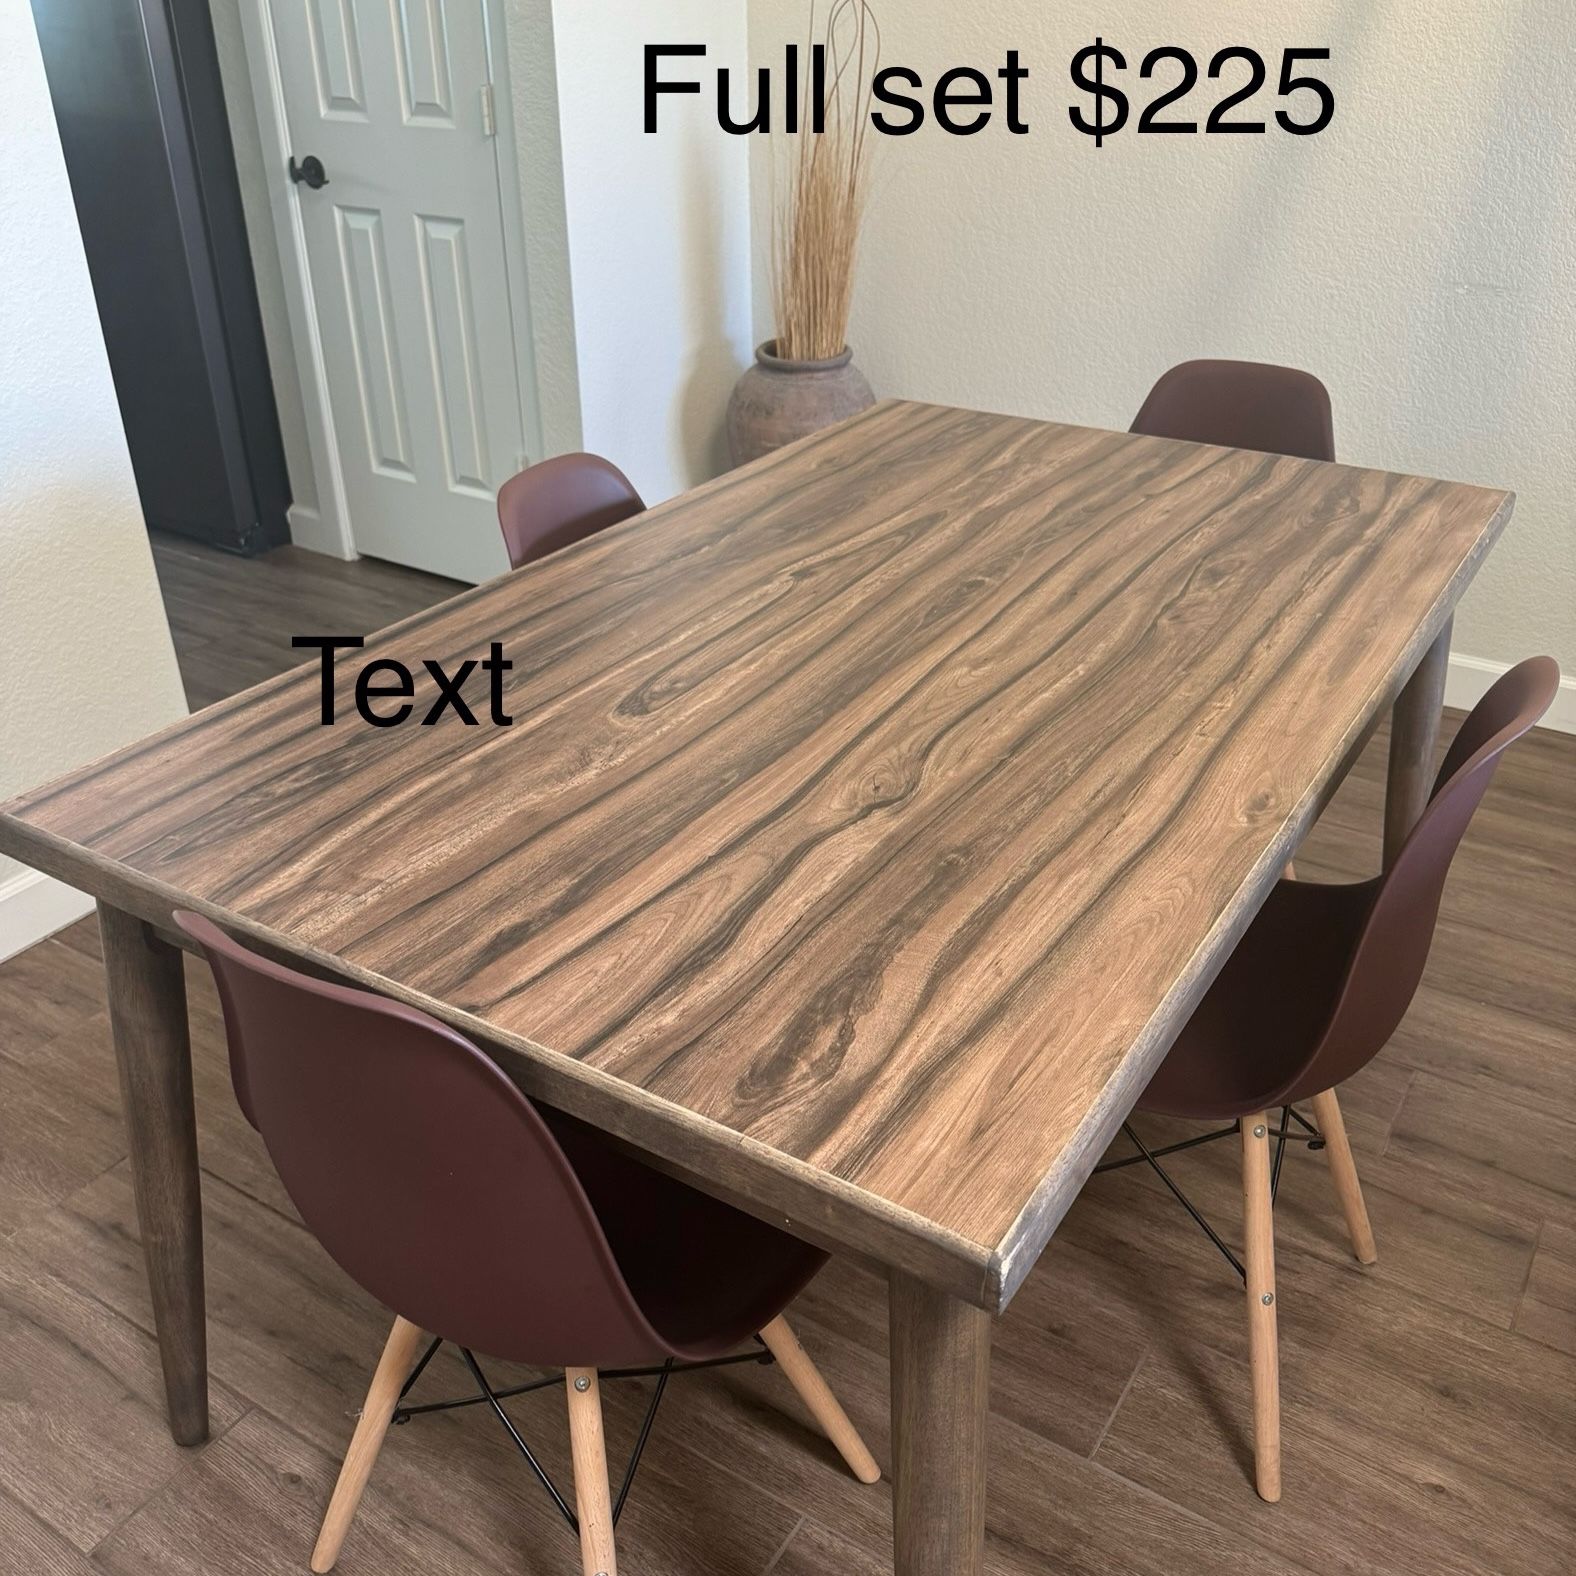 Table w Chairs 